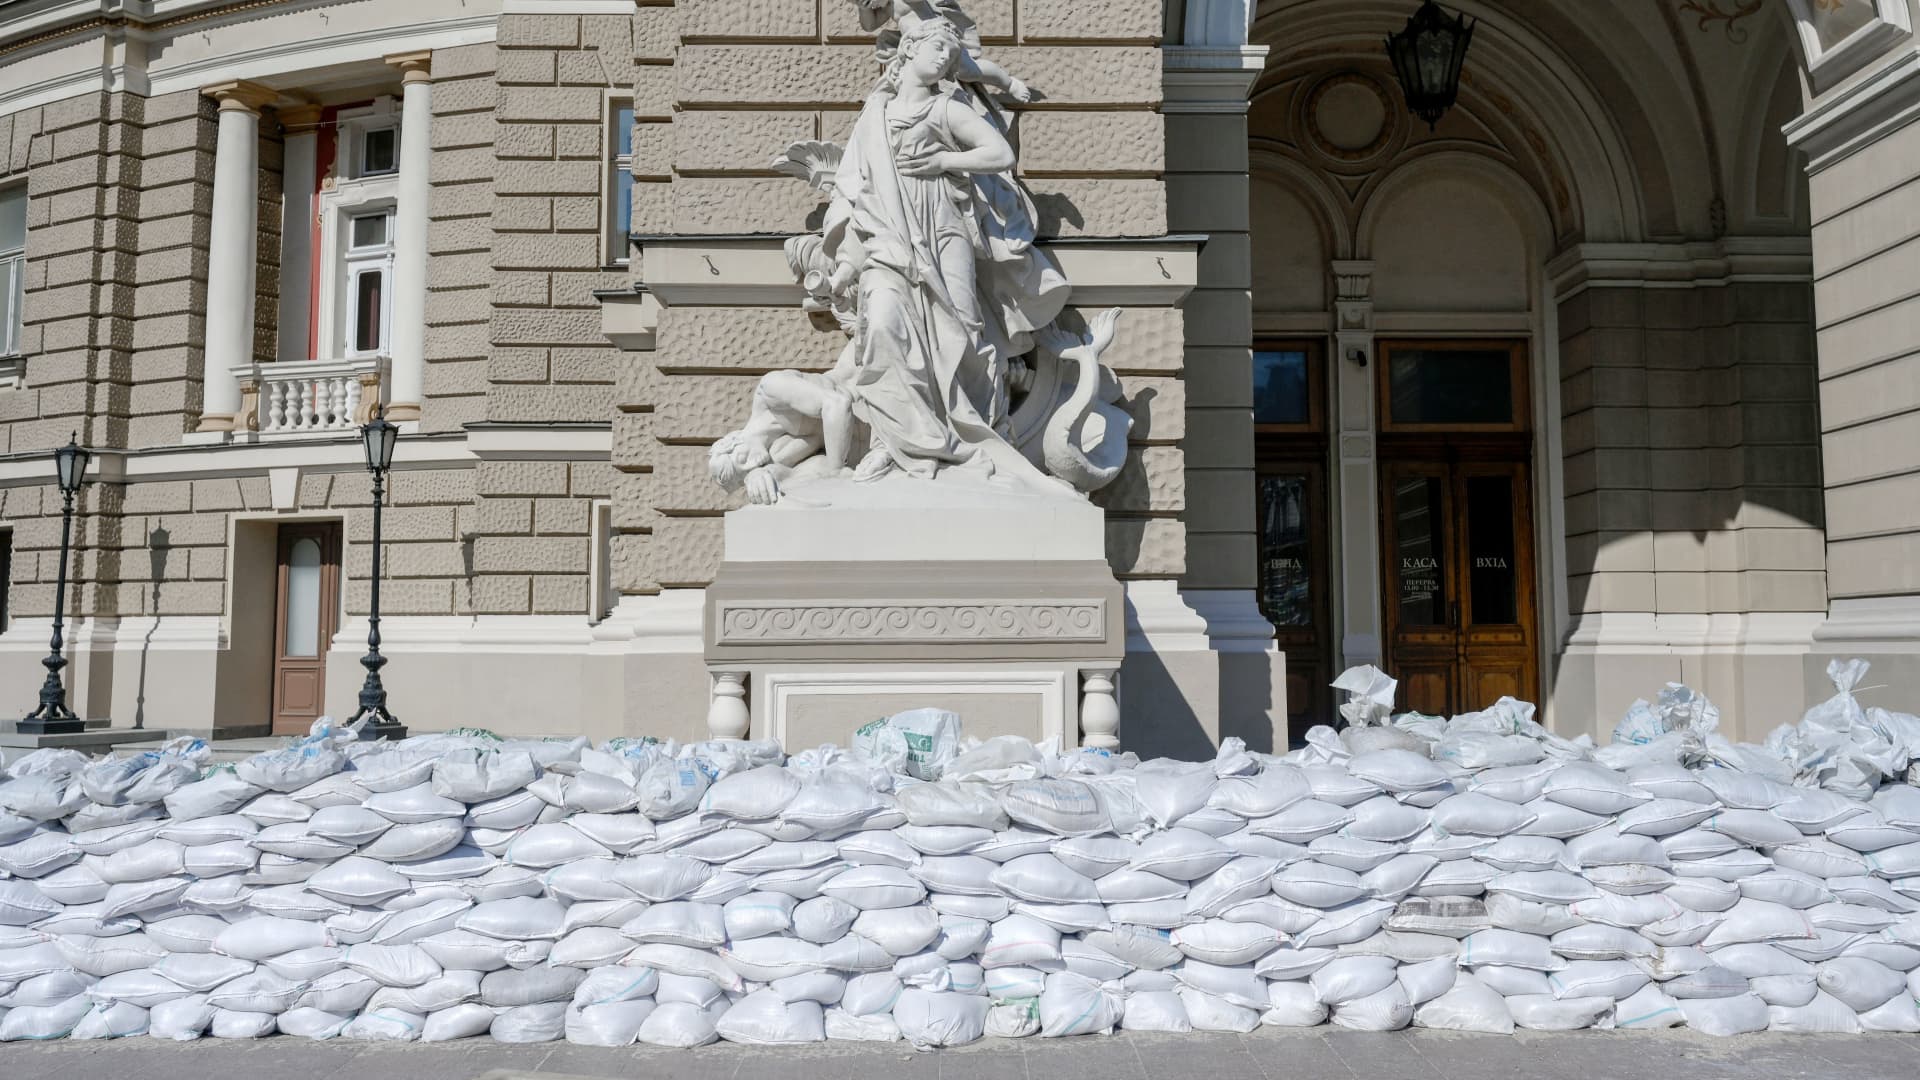 A barricade is pictured in front of the National Academic Theater of Opera and Ballet in Odessa on March 17, 2022.